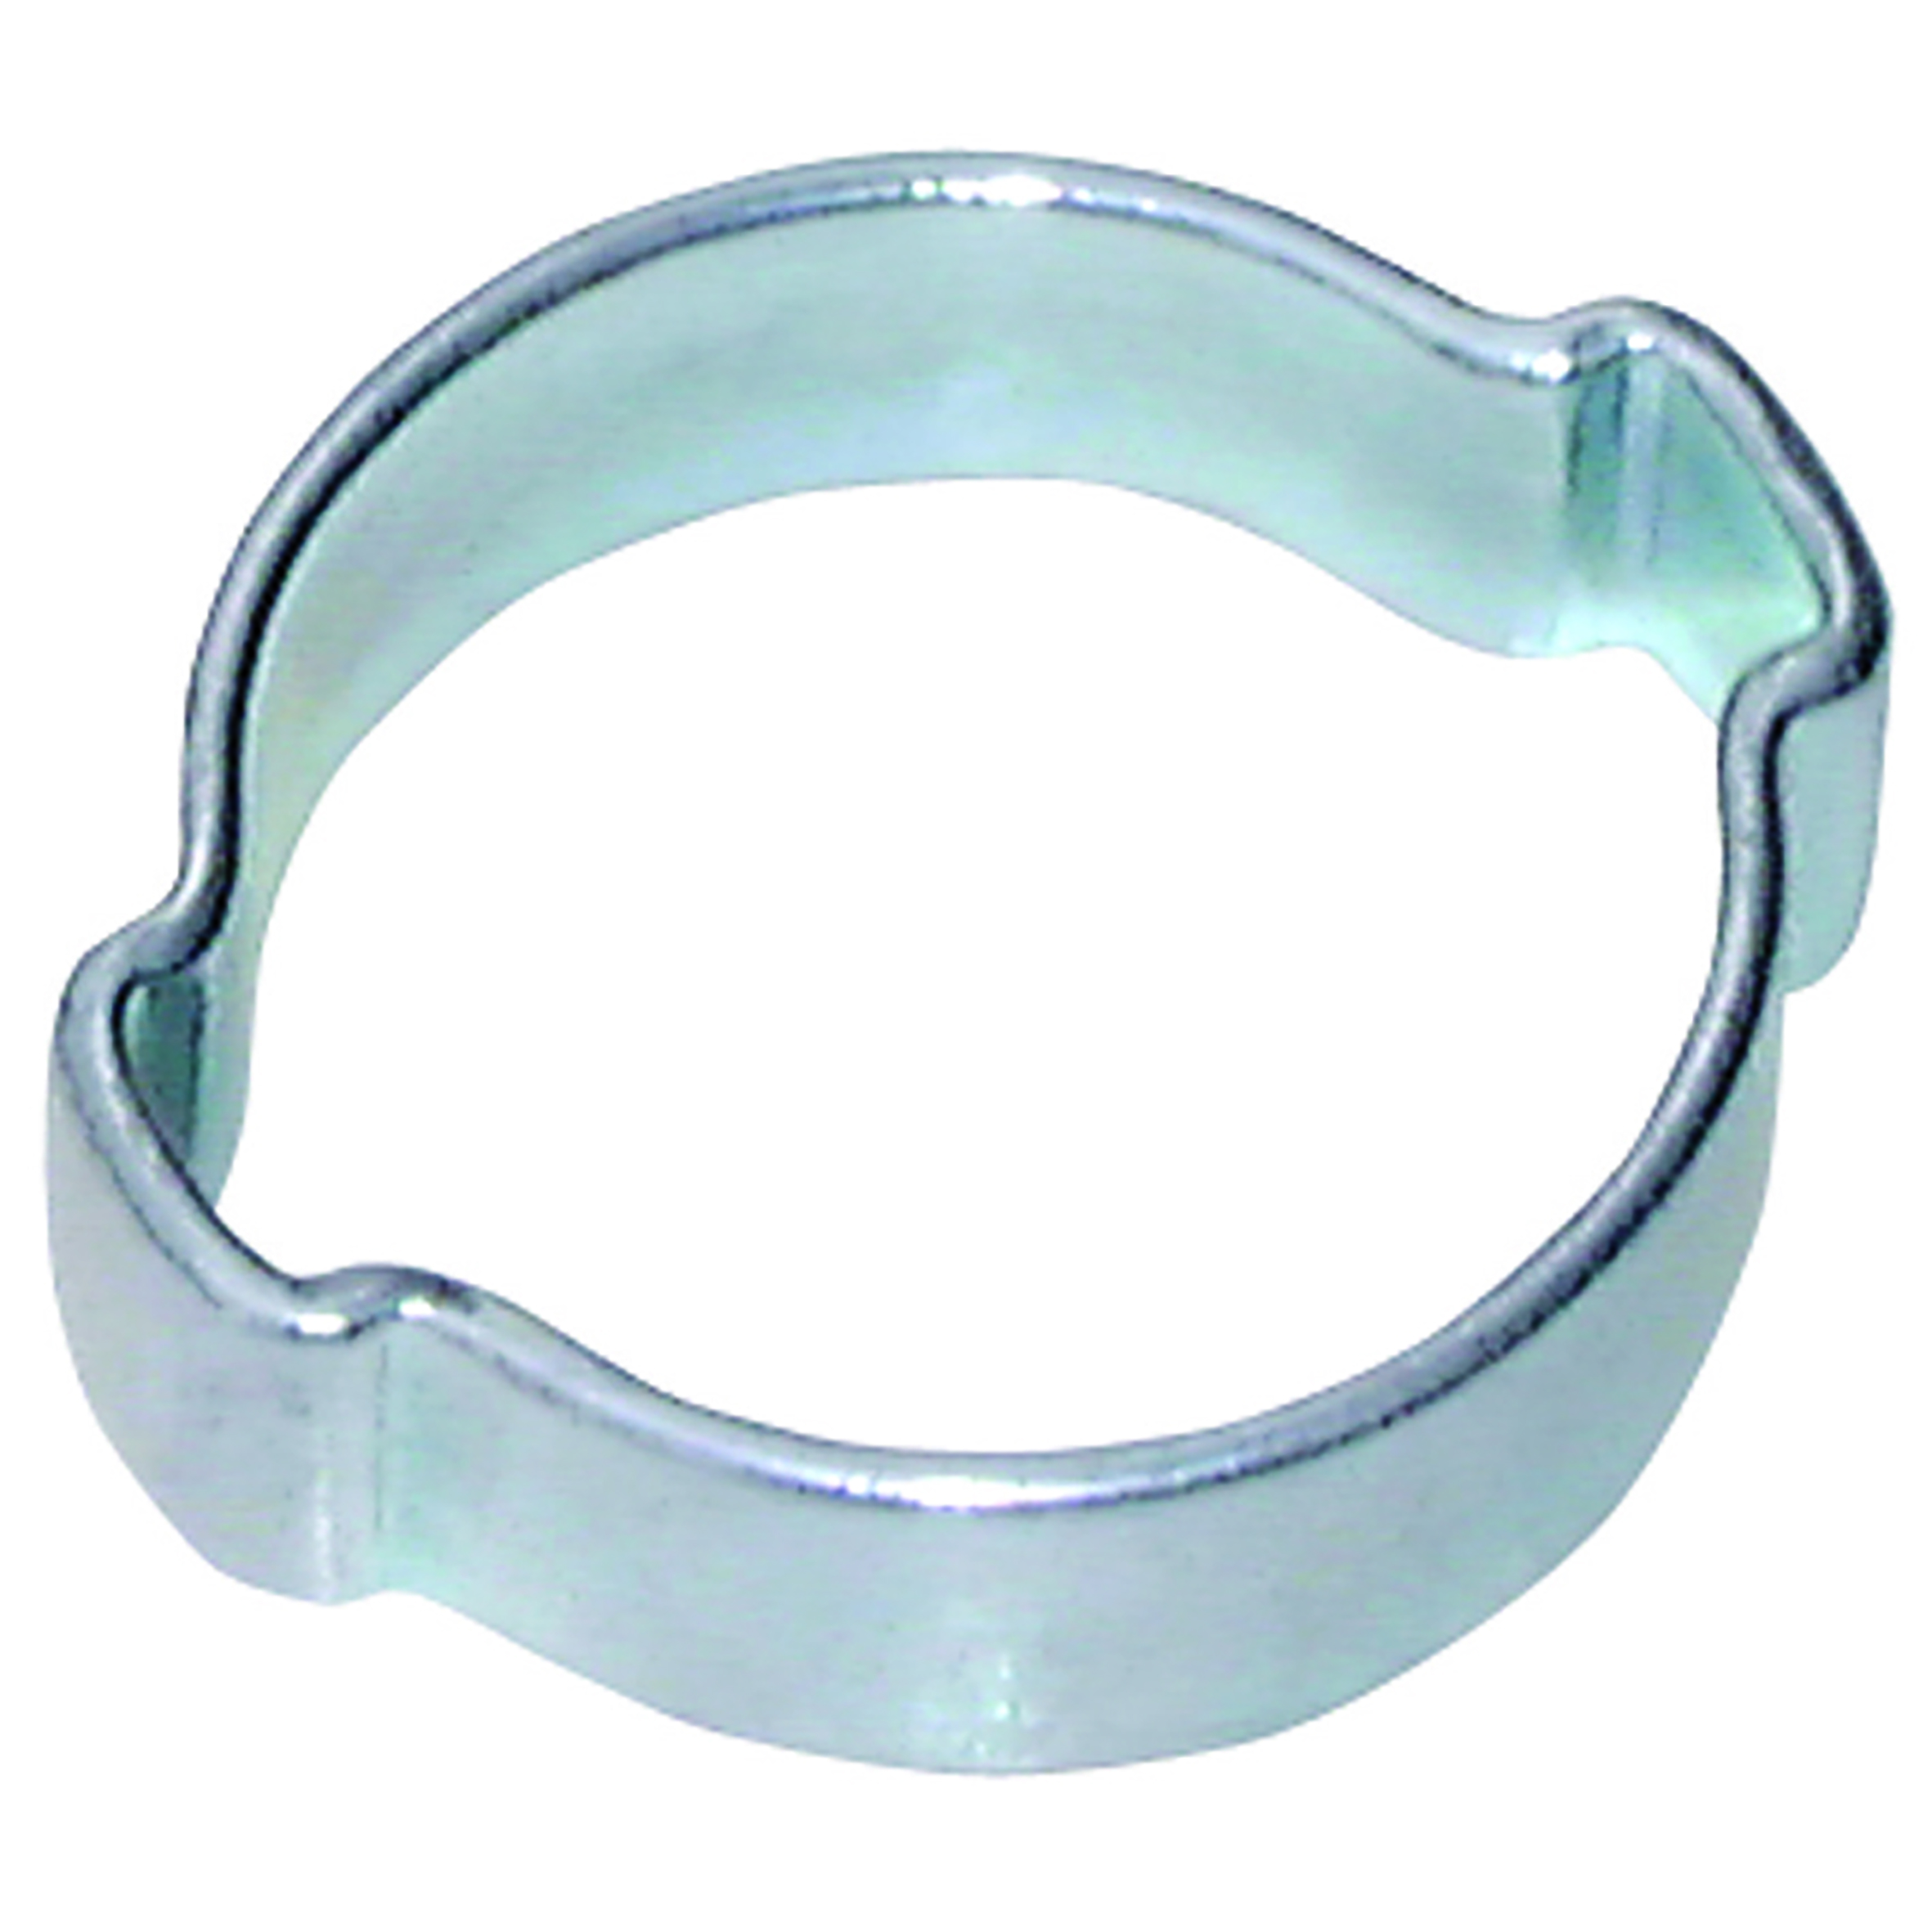 11.0-13.0MM 2-EAR STEEL CLAMP PLATED